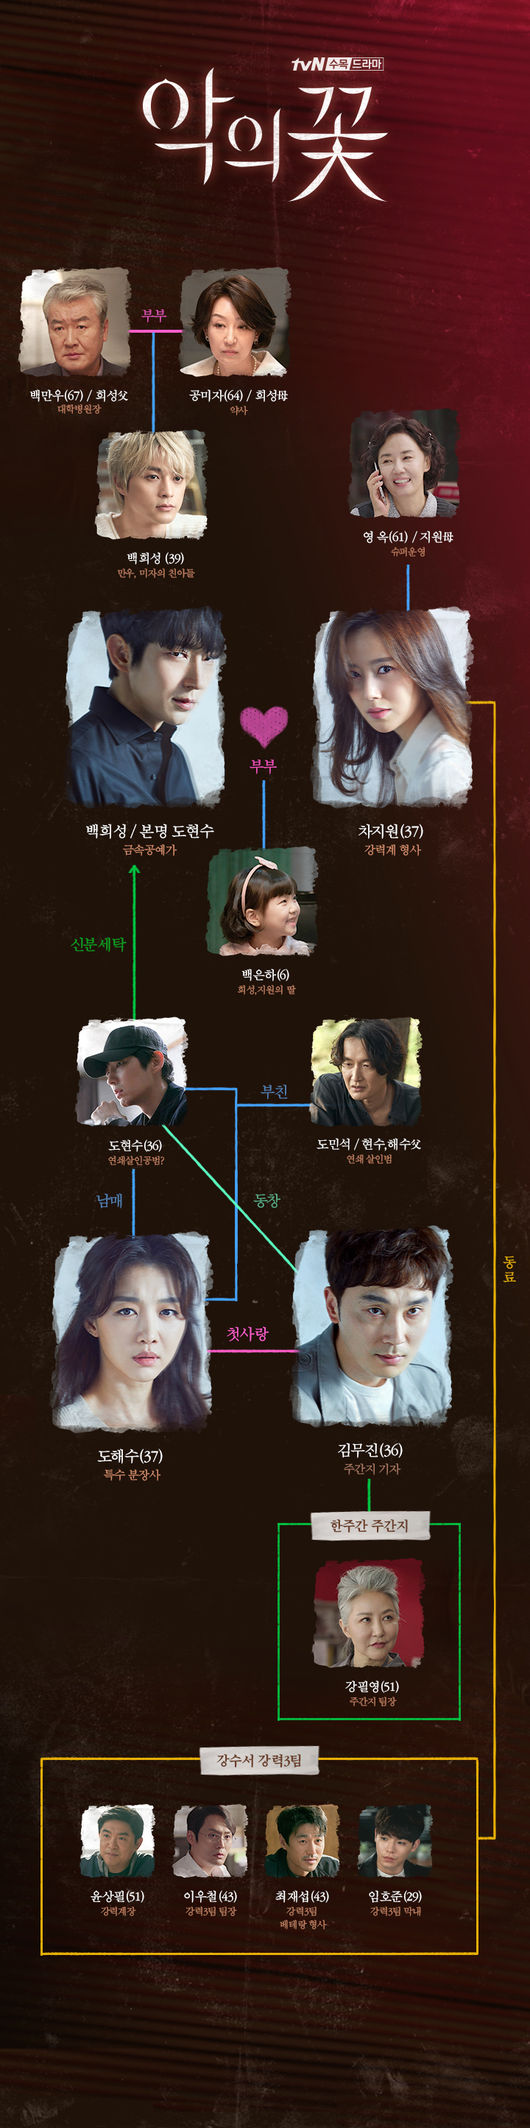 TVNs tree drama The Flower of Evil is swirling with the overwhelming Kahaani development until the first three episodes, foreshadowing a more thrilling story.The Flower of Evil, which first aired on the 29th of last month, is a high-density emotional tracking drama by Baek Hee-sung (Lee Joon-gi), a man who played even love, and Cha Ji-won, a Detective wife who began to doubt his reality.It stands for the suspense melodrama of two people standing in front of the truth that they want to ignore.It was broadcast three times until the 5th, but the tension in the room was great.Lee Joon-gi, who lived as Baek Hee-sung, was actually Do Hyun-soo who was chased as a serial killer, and the real Baek Hee-sung was Kim Ji-hoon,Studio Dragon Yoo Sang-won CP said in an interview on the 6th, There is a dramatic setting of husband and Detective wife suspected of serial killer.The artist has made the arrangement between the characters well in it, and the artist continues to throw the elements that can be interpreted universally in dramatic settings.This is why Kahaani is empowered because the relationship and confrontation between characters are solid. The harmony of the staff such as director, actor, writer, and music is very good.Everyone is shooting happily, he said.The Actors Hot Summer Days were overwhelming by the third inning.Yoo Sang-won CP said, I was reunited with Lee Joon-gi when I was a Chosun gunman, but even then, energy, force and posture are very good.It makes your opponent Actor and staff full of energy. Its like Energizer. I felt it again. More than anything, it makes you stand out.Moon Chae-won, Seo Hyeon-woo, etc., and the Actor is outstanding. As for Moon Chae-won in the role of Cha Ji-won, I met again after The Princess Man. Moon Chae-won Actor is a heroine of melodrama.The Flower of Evil is a melodrama with a genre of masks, and it is well suited. Director Kim Chul-kyu makes her actor stand out, but Moon Chae-won does not do that this time.Moon Chae-wons charm is still not half as good as it is.Hot Summer Days by Seo Hyeon-woo was also impressive. Yoo Sang-won CP said, It is an actor that reveals presence.The role I have played in the meantime was good, but Kim Chul-kyu casts it without hesitation because it is the perfect actor for Kim Moo-jin.I do not just reveal myself, but I also have a good breath with Lee Joon-gi In the fourth episode, which aired on the 6th, the story of a car support and Baek Hee-sung, who are chased and chased by each other, will be included.In addition, since the person who tracks himself is the wifes car support, the tension between the two is expected to explode further.Yoo Sang-won CP said, I would like you to enjoy a lot of well-made works for the people who make them.The first and second episodes would have been, What is this drama? In the third and fourth episodes, the stories of the central characters are bumped into earnest.Ill be able to solve it in earnest from the fifth inning, so Id like to ask you to watch a lot of things.The fourth episode of the TVN tree drama The Flower of Evil will be broadcast at 10:50 pm on the 6th.tvN